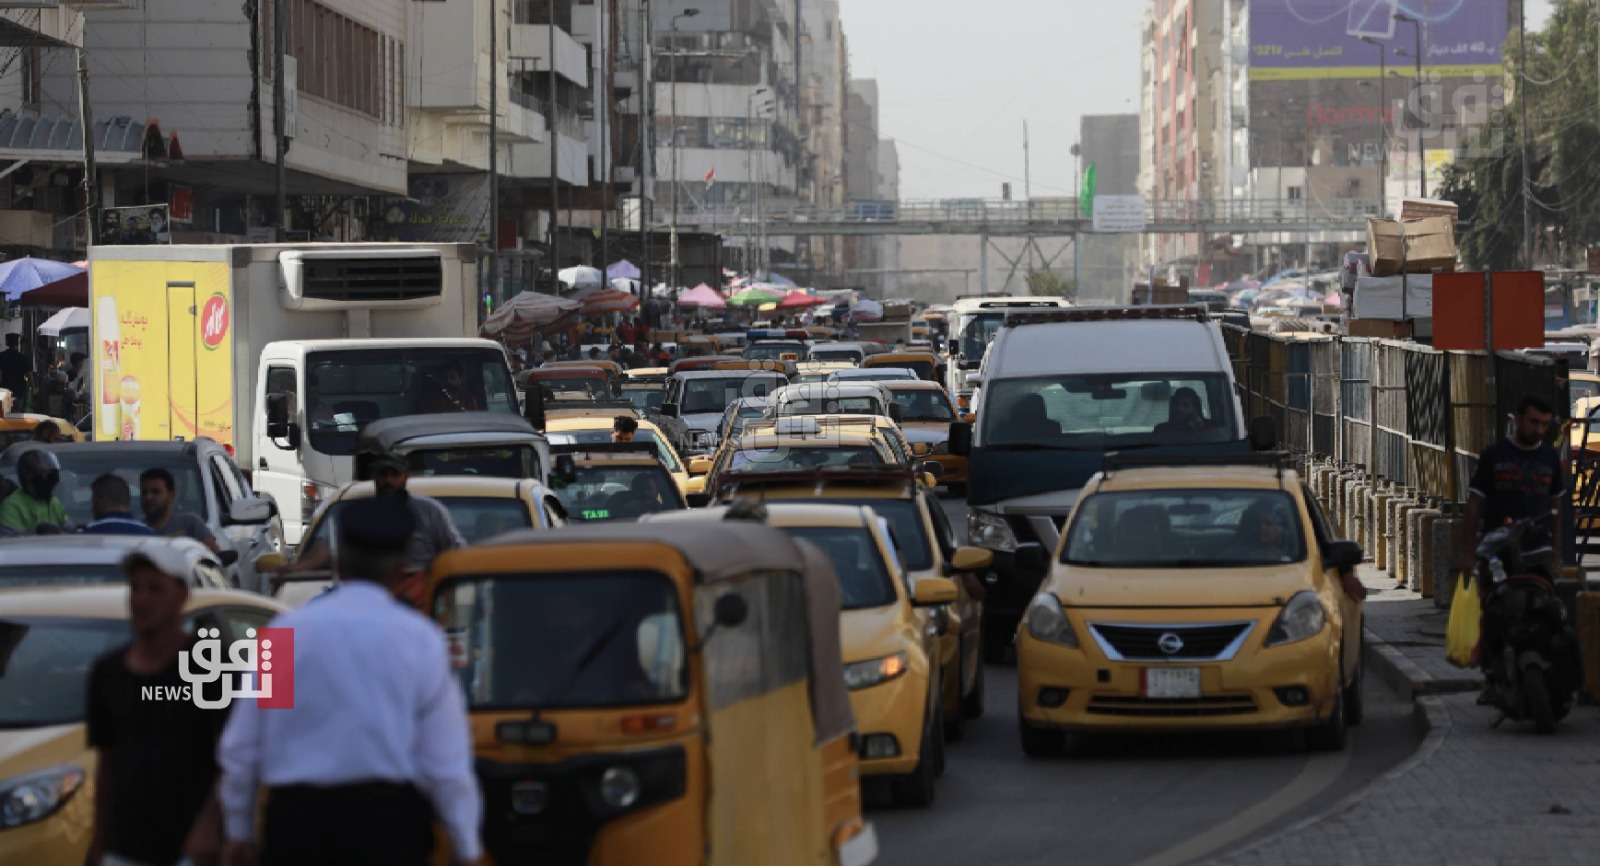 Money is not the only issue, Construction Minister says on Baghdad's traffic